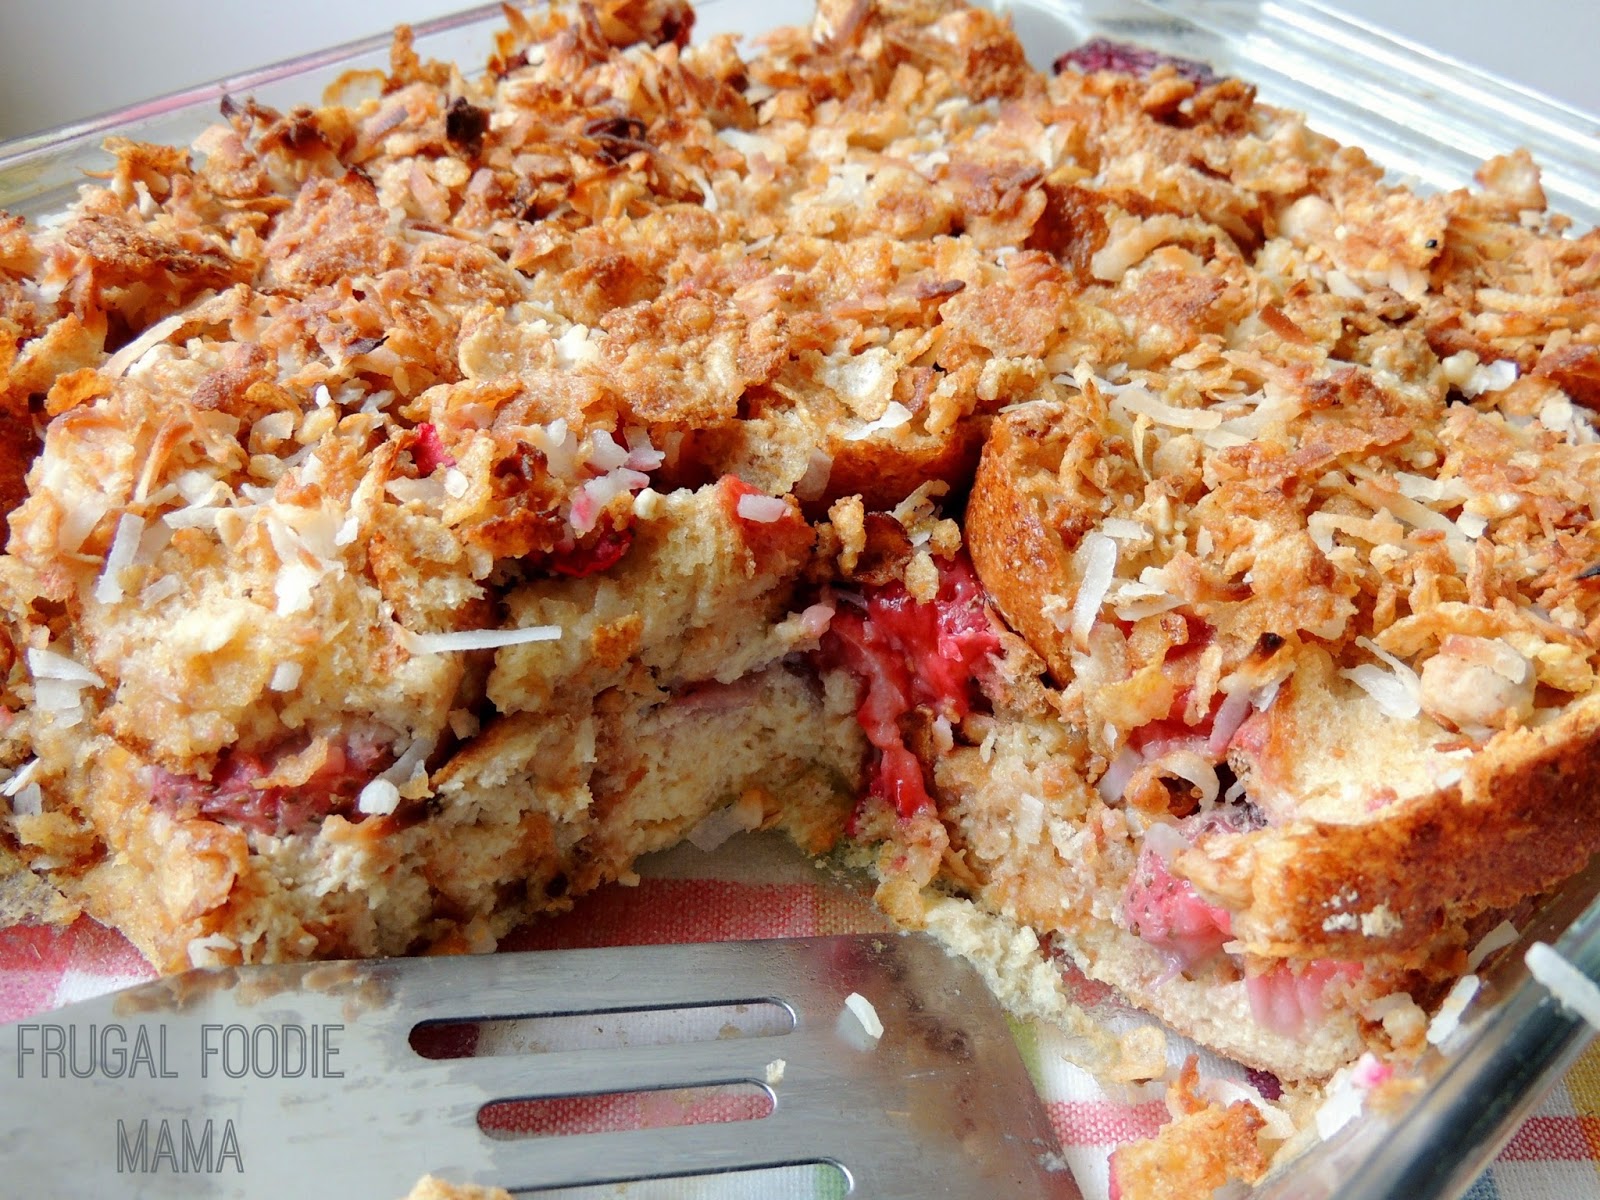 This delicious Strawberry-Coconut Crunch Layered French Toast is virtually guilt free thanks to nonfat Greek yogurt, fresh sliced strawberries, & crunchy Post Honey Bunches of Oats Greek Honey Crunch cereal.